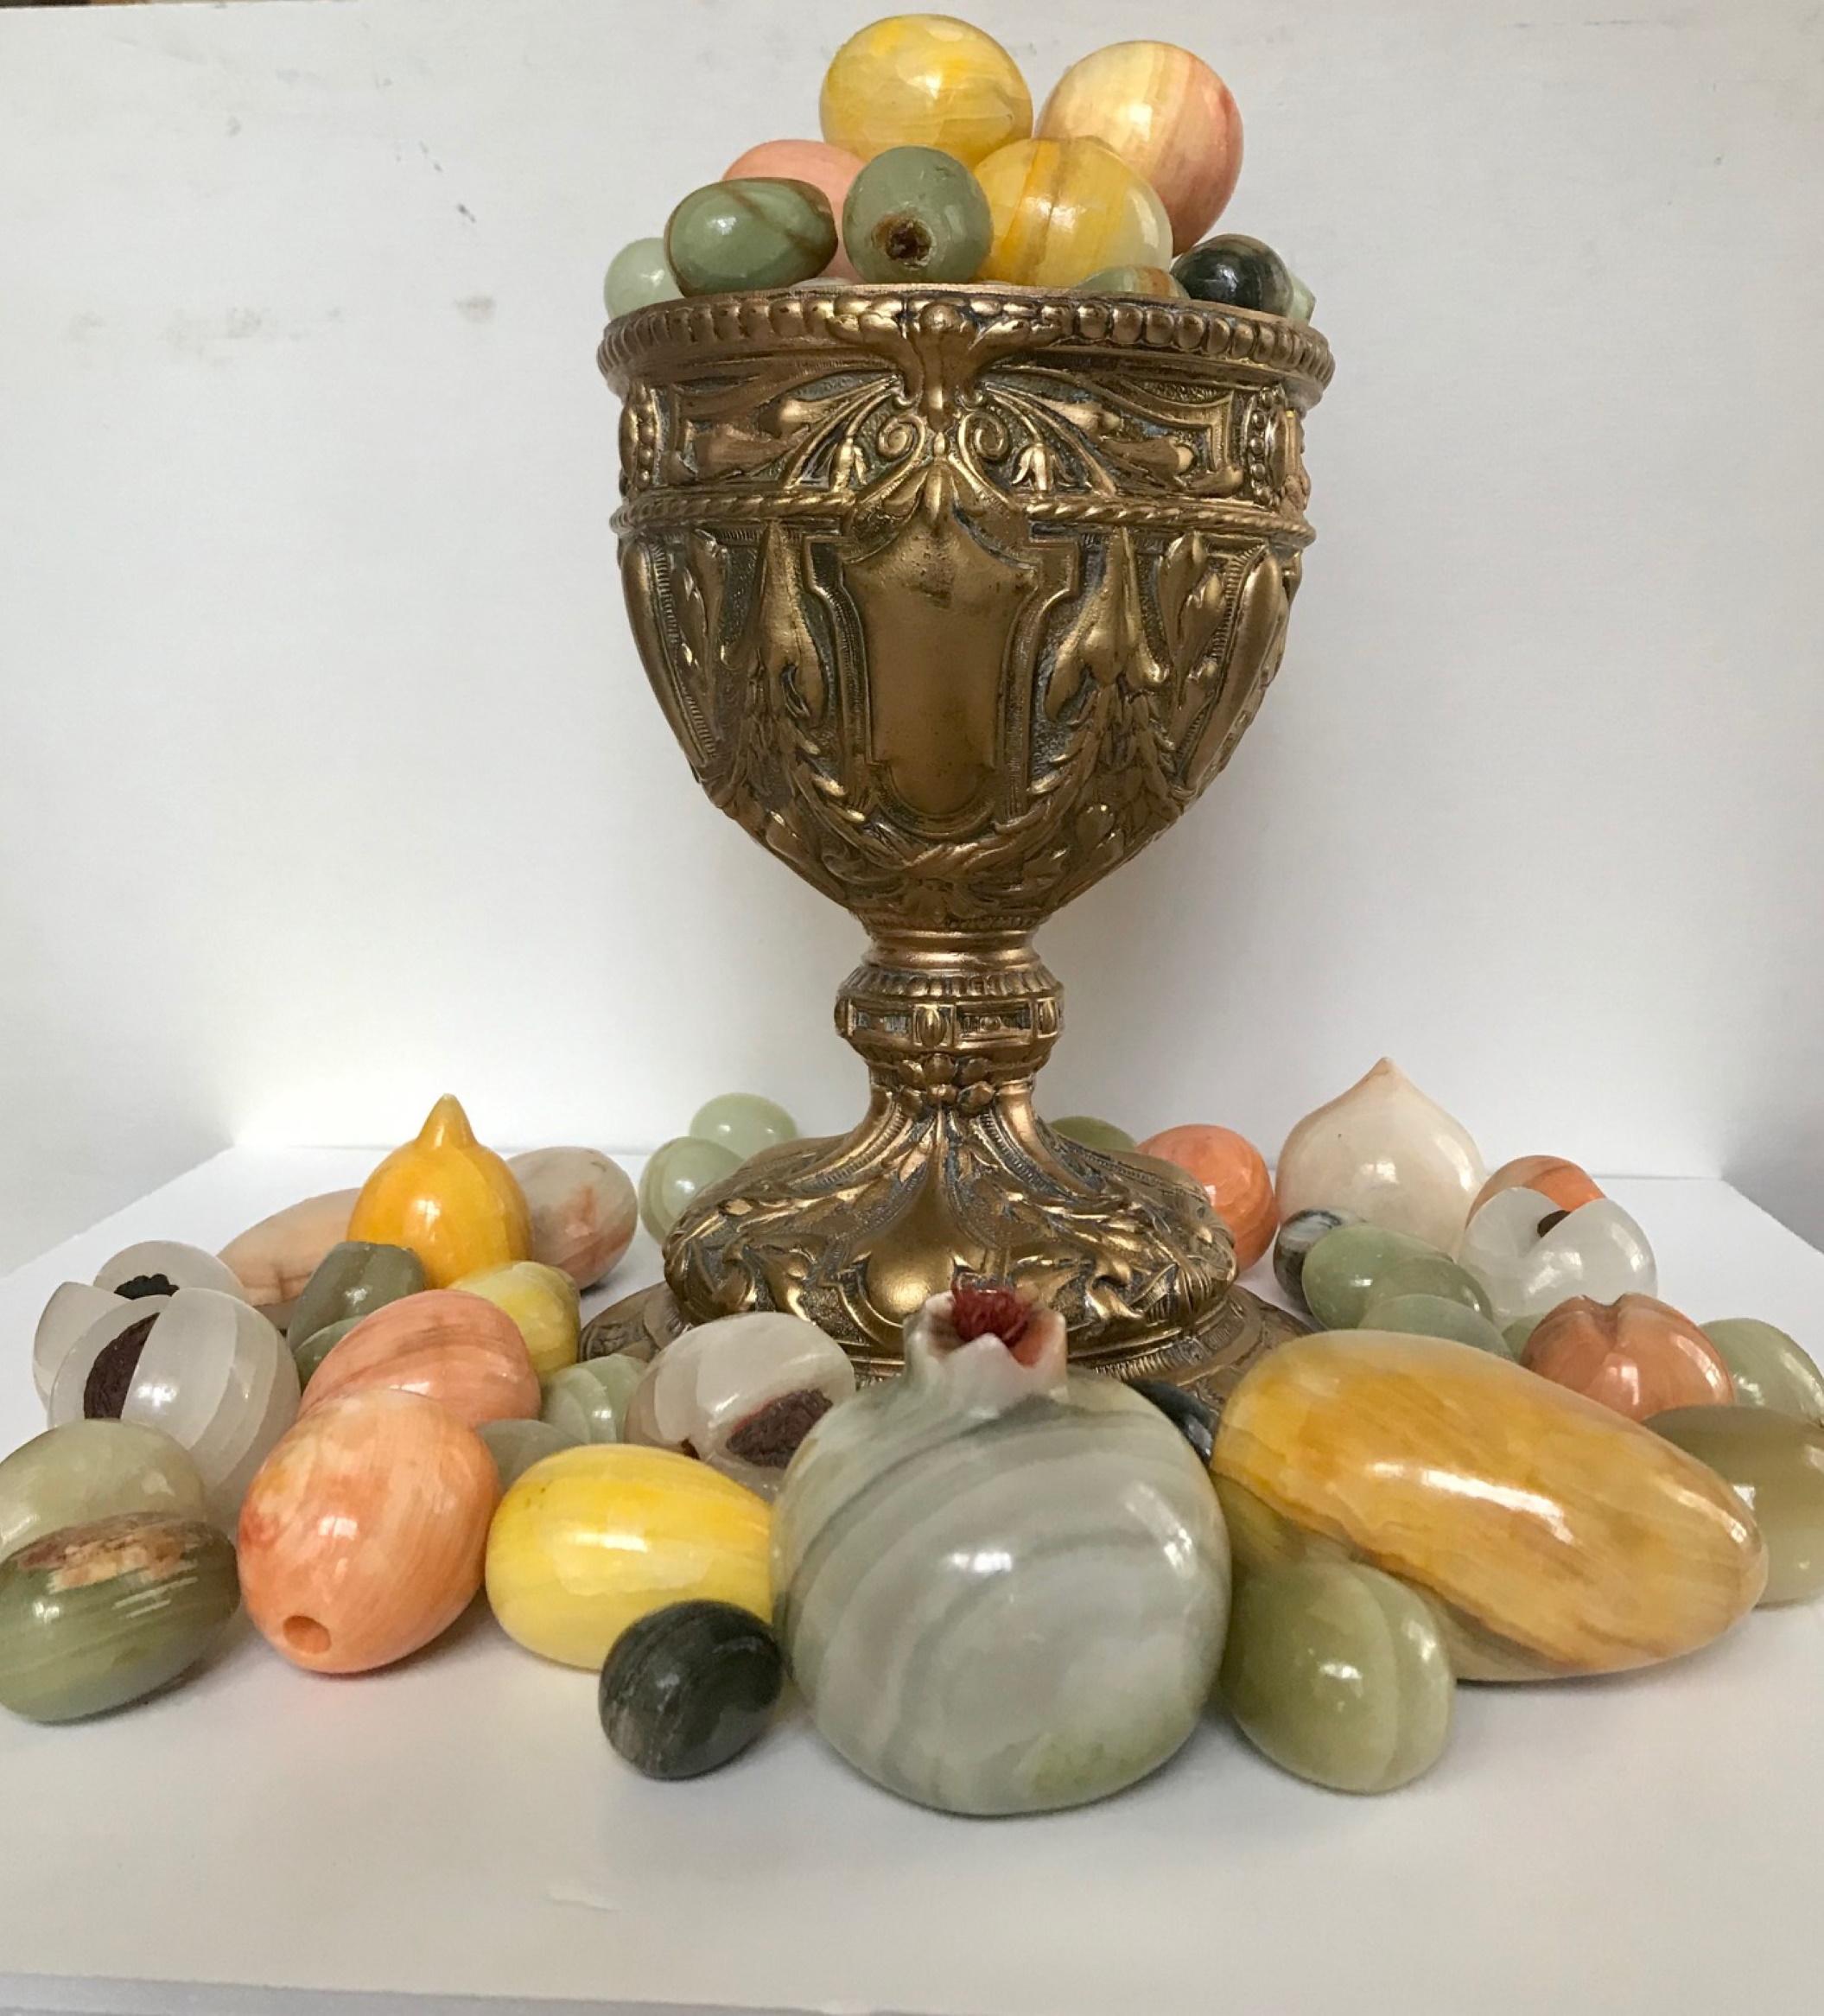 Vintage stone fruit, collection of 72, onyx, alabaster marble
This is a collection of 72 vintage onyx, marble and alabaster fruit which comes with a 19th century gilt metal goblet. A beautiful décor compliment or centerpiece.

The vintage fruit